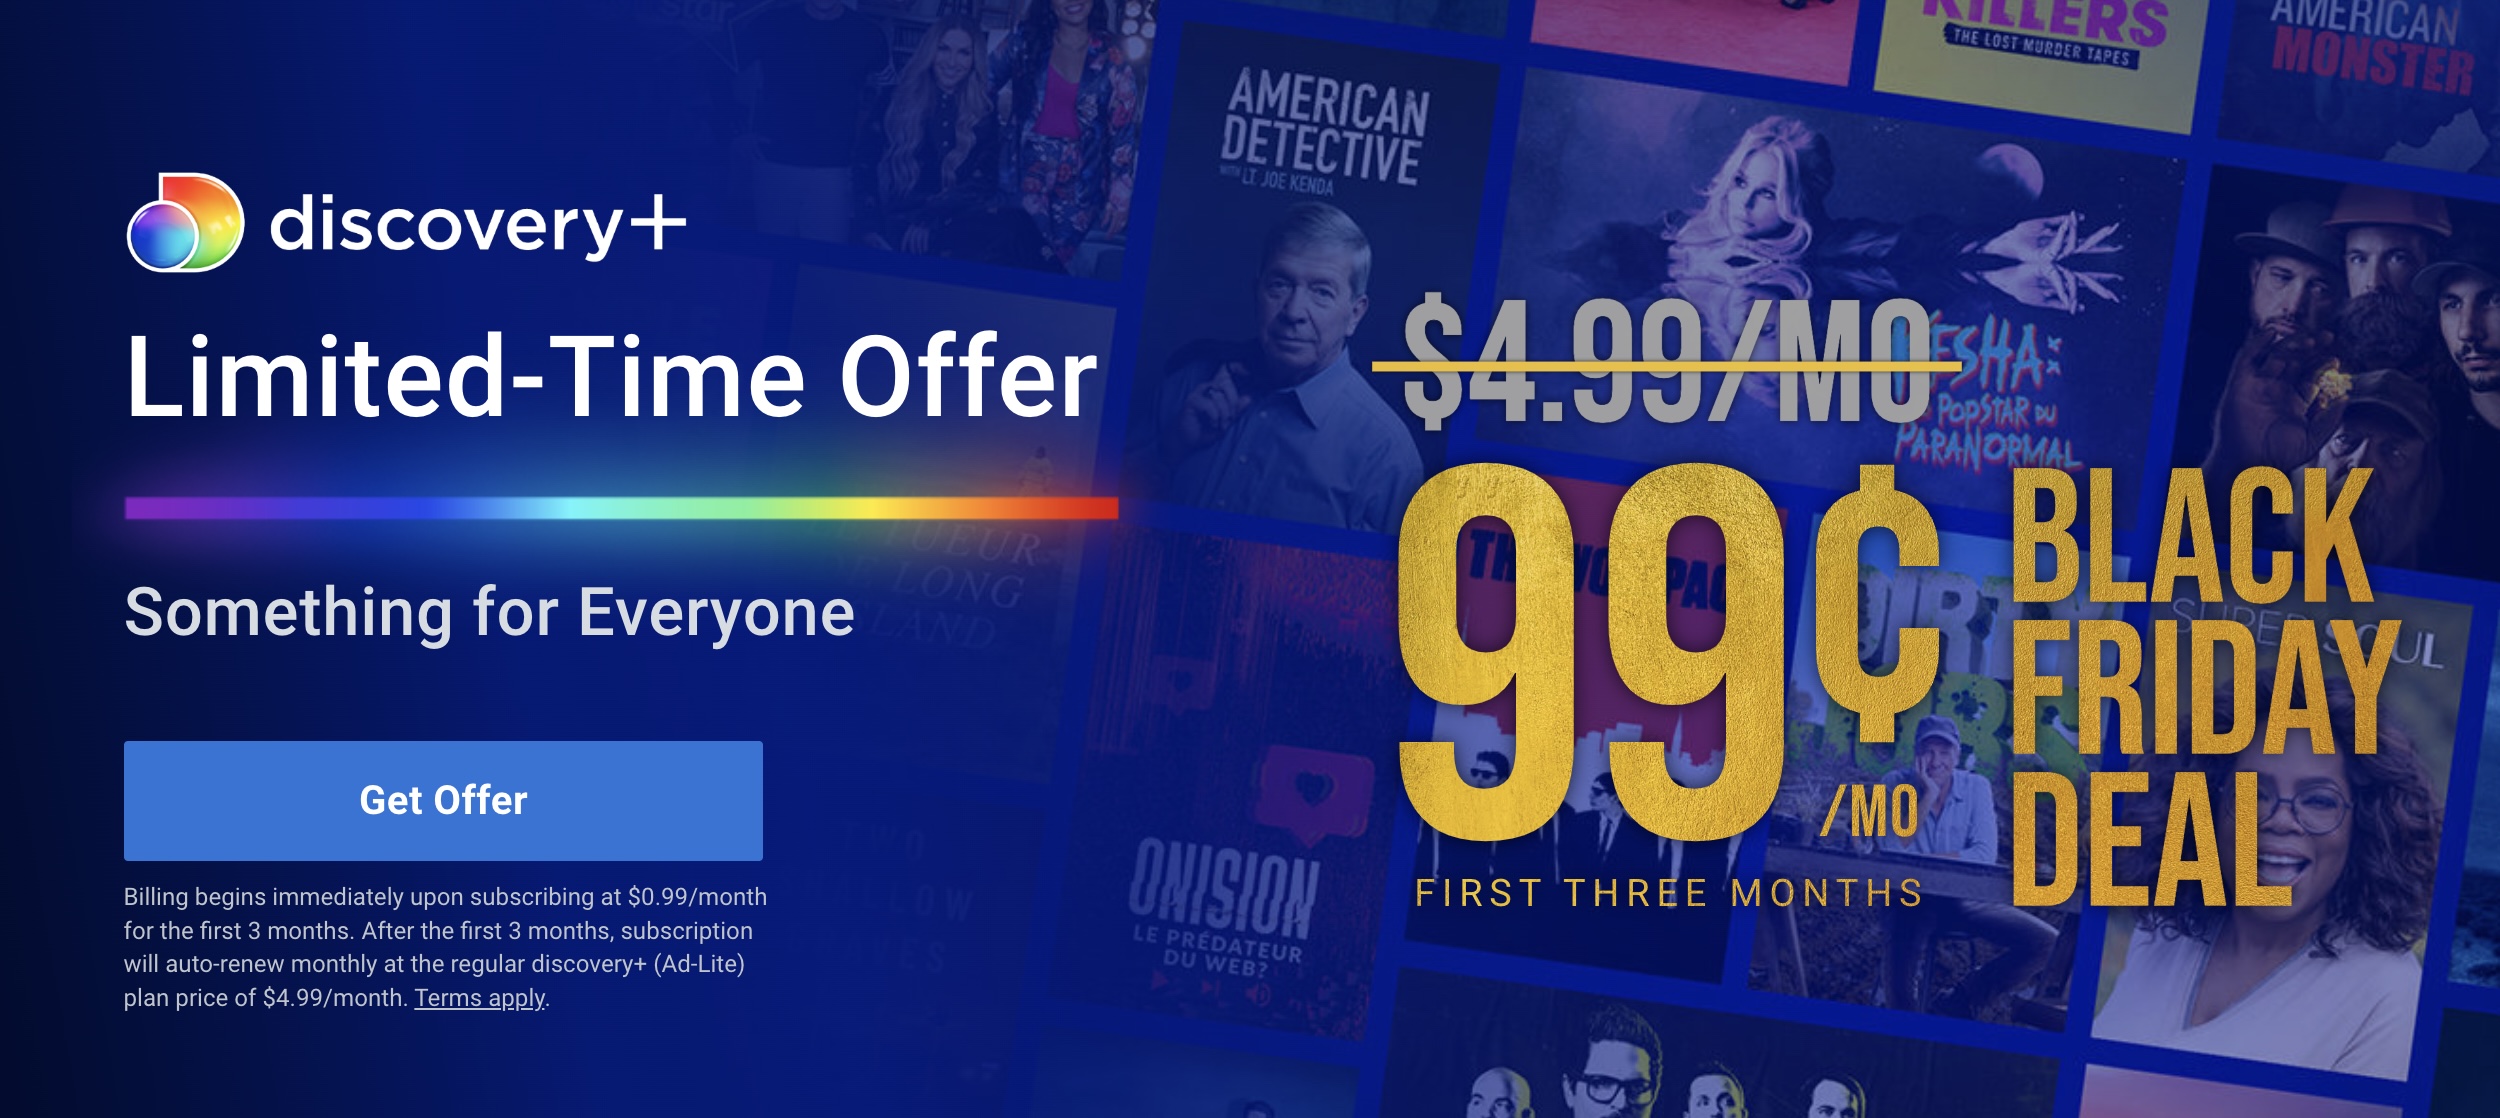 Discovery+ Canada Black Friday Deal Offer 2022 99 Cents for 3 Months